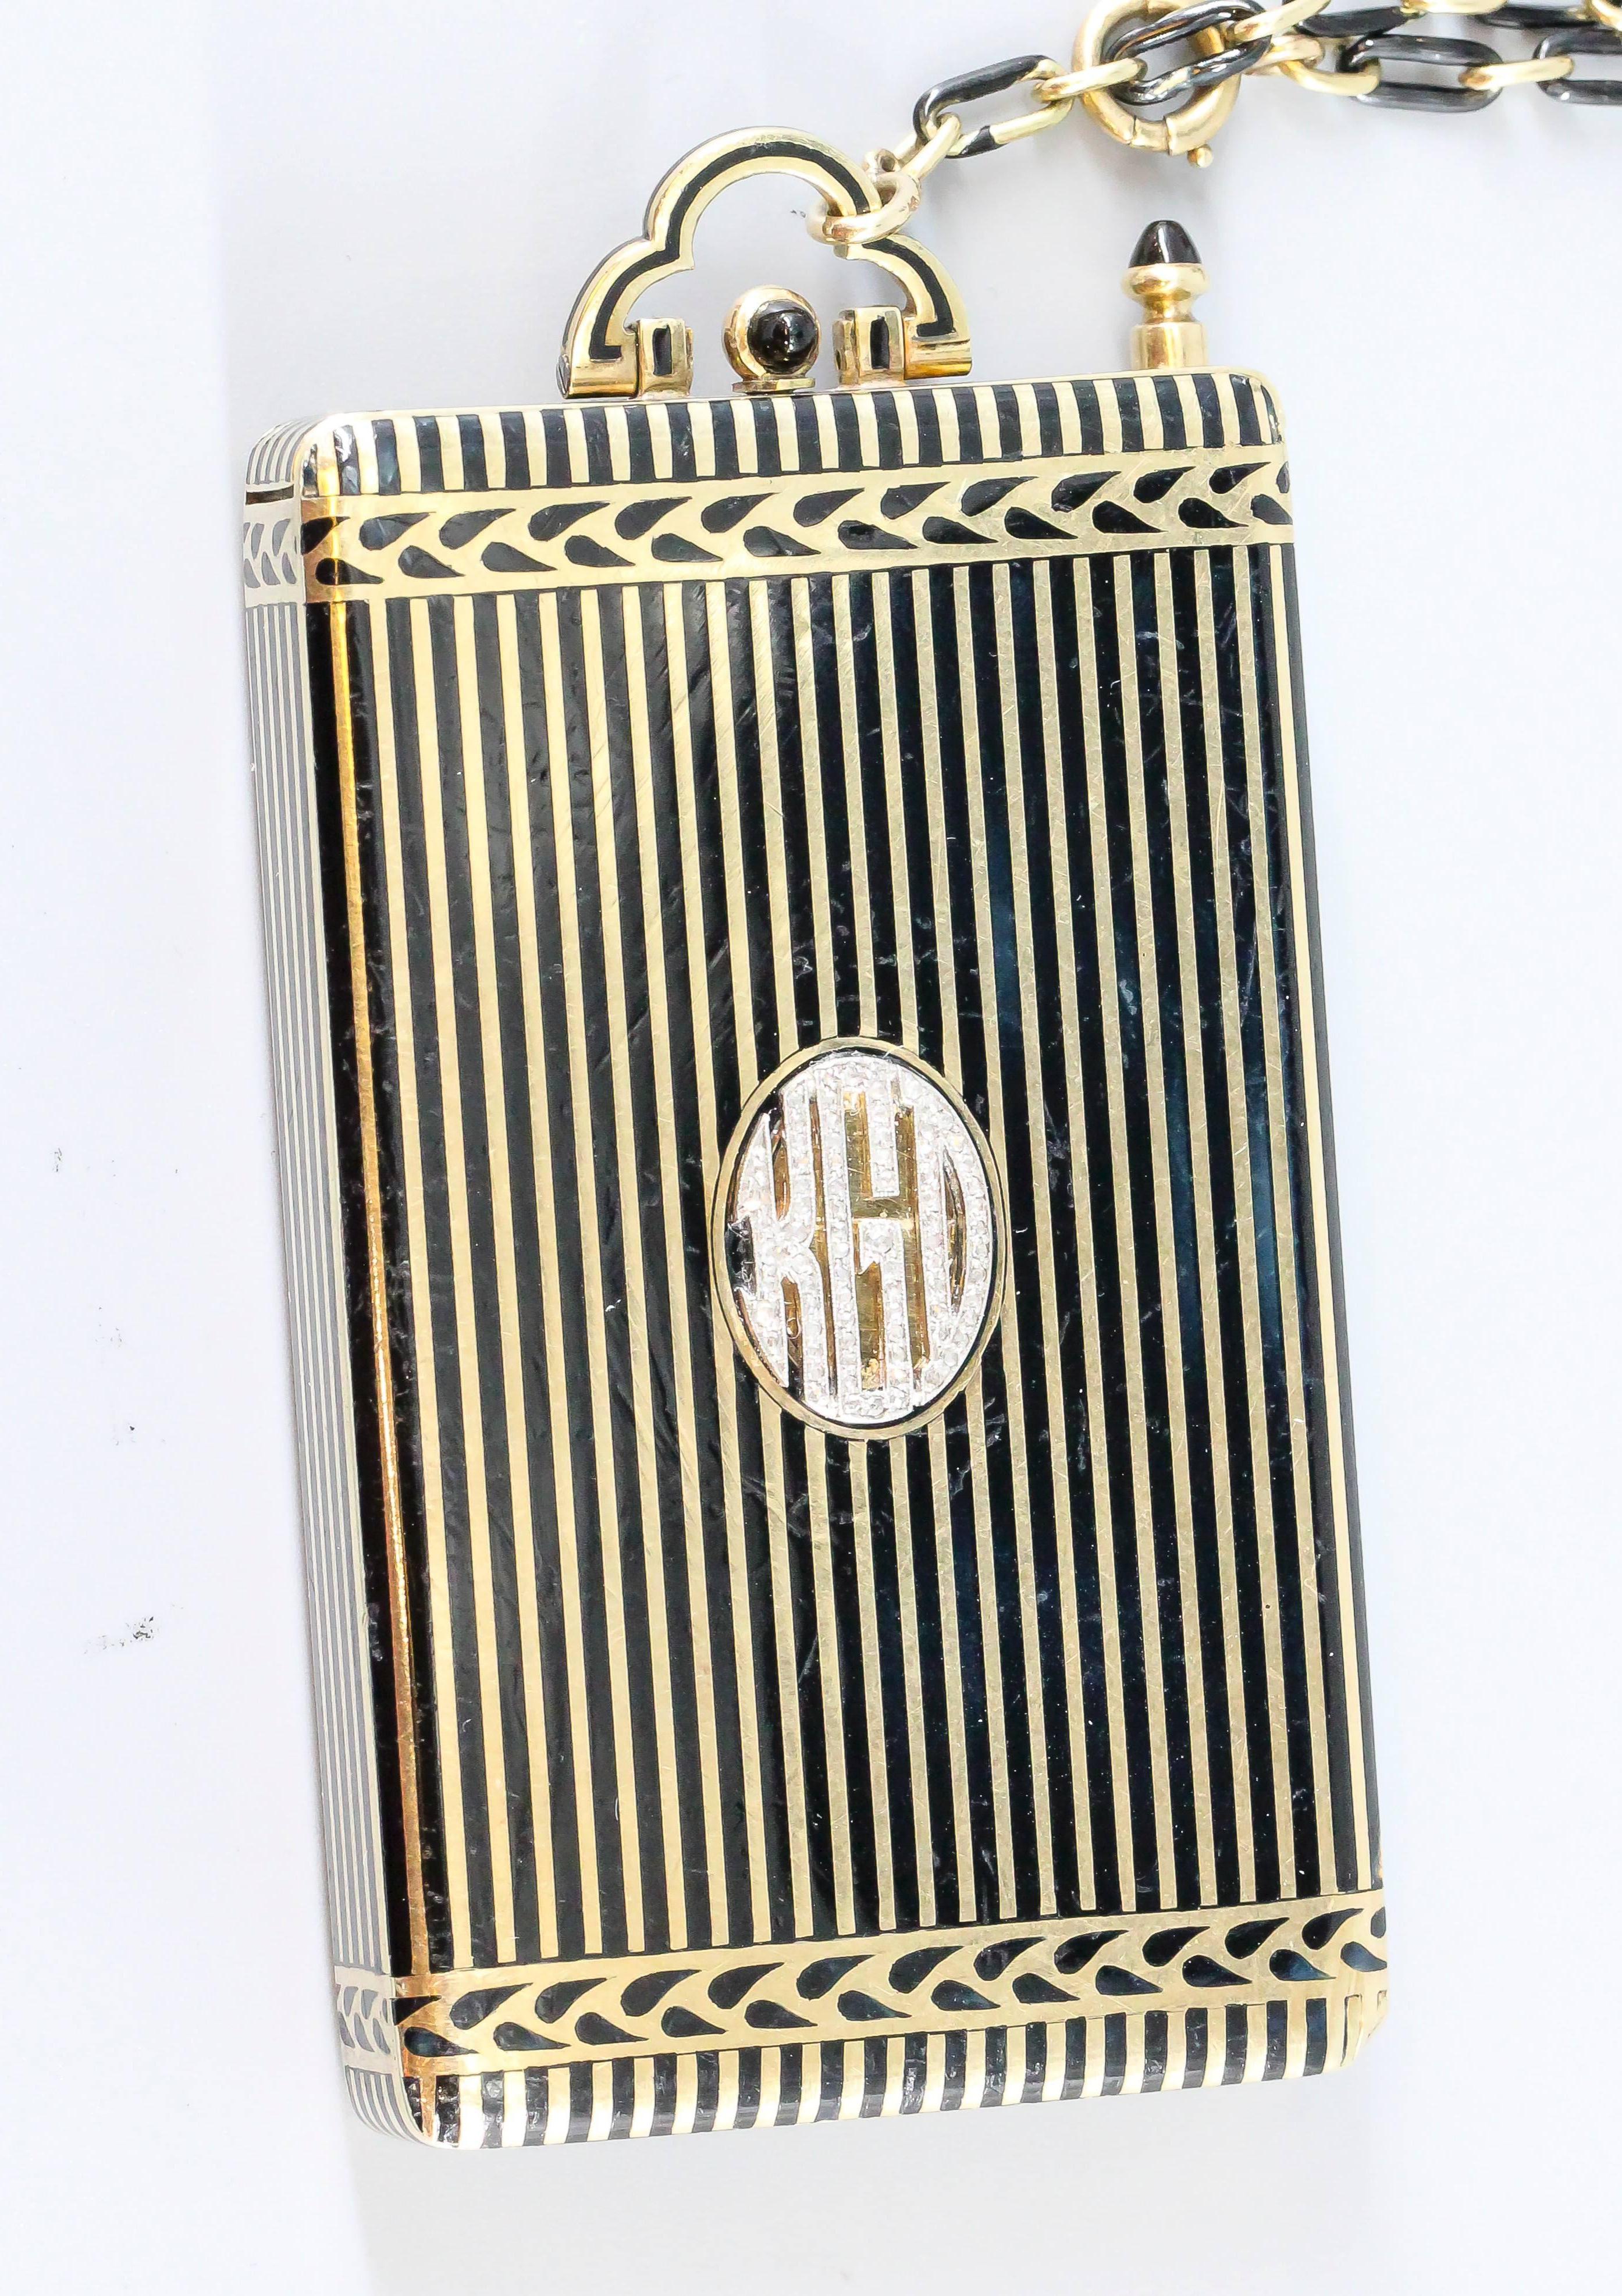 Rare and unusual Art Deco 14K gold and black enamel minaudiere by Cartier, circa 1930s. It features a compact, lipstick case, notepad holder and pencil. Also features platinum and diamond initials 